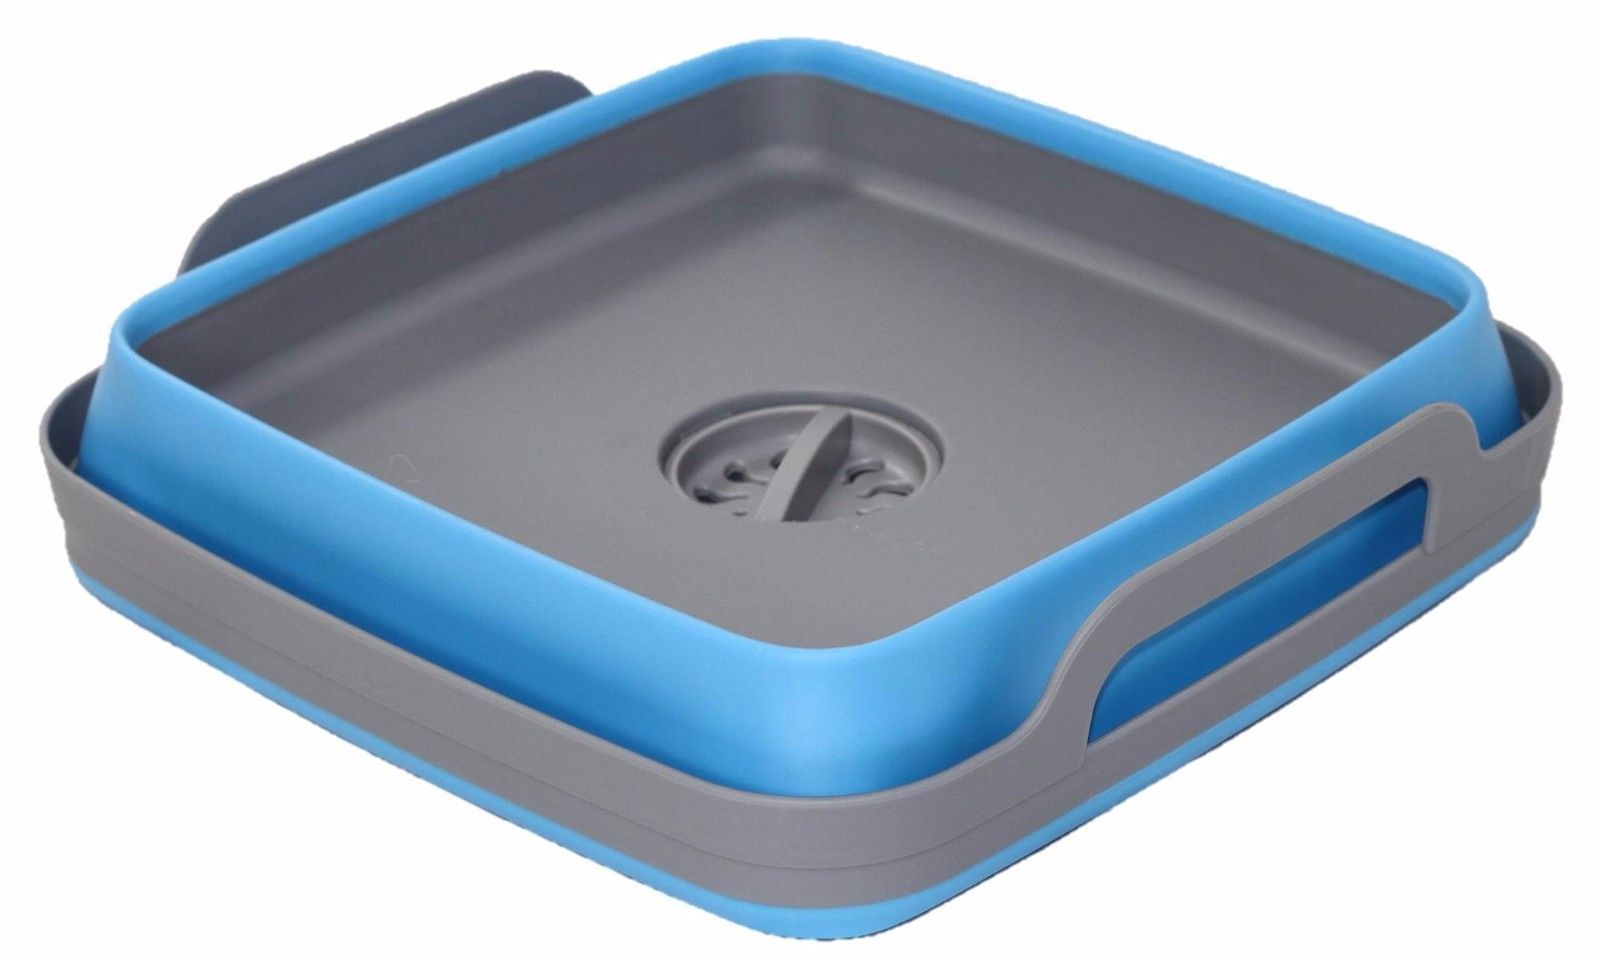 Space Saving Collapsible Blue Sink Collapsible Space